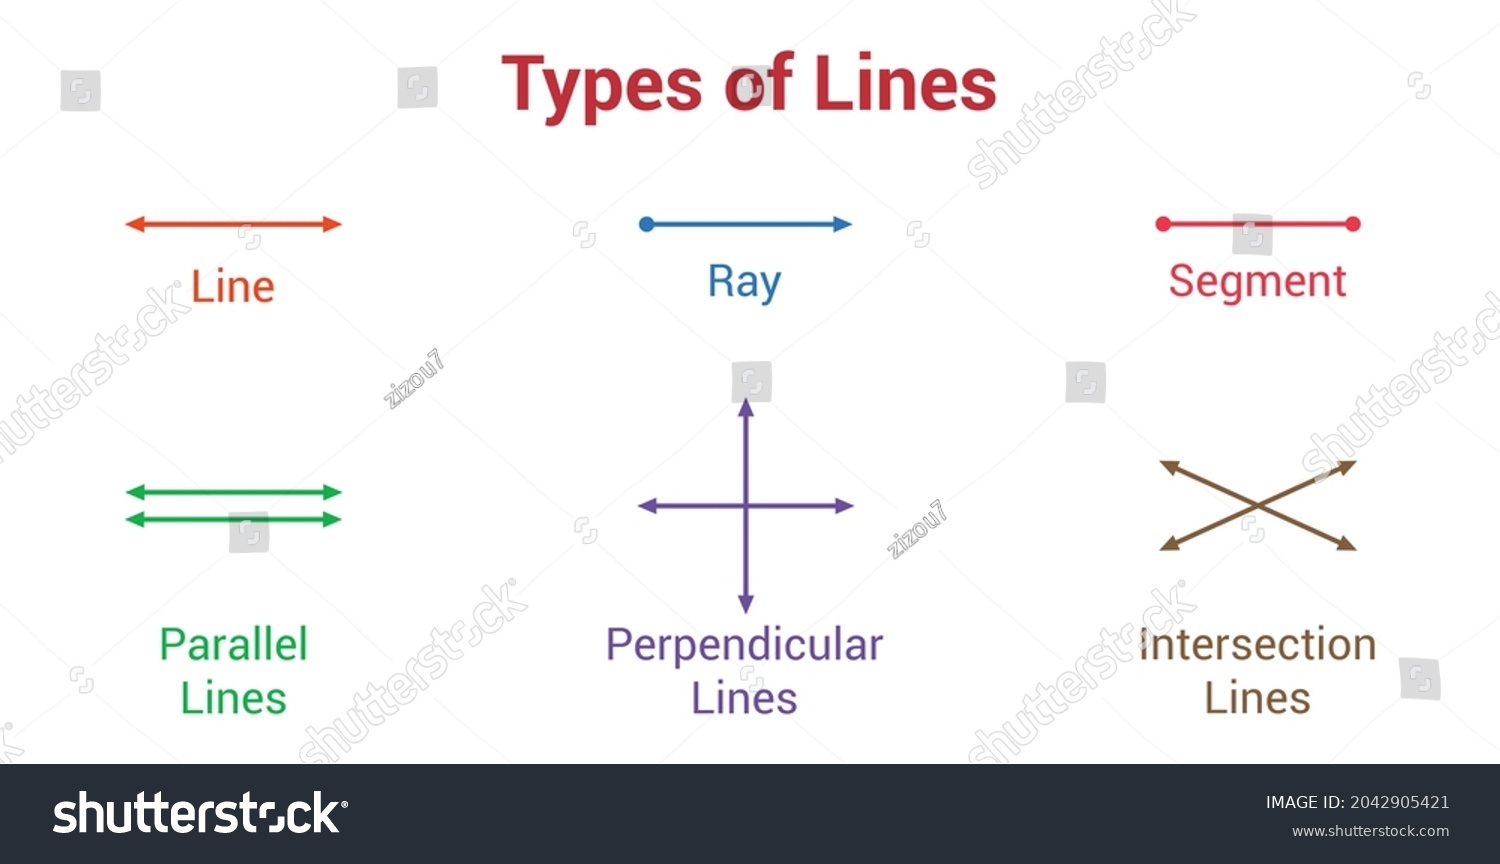 distance between two parallel lines - Class 5 - Quizizz